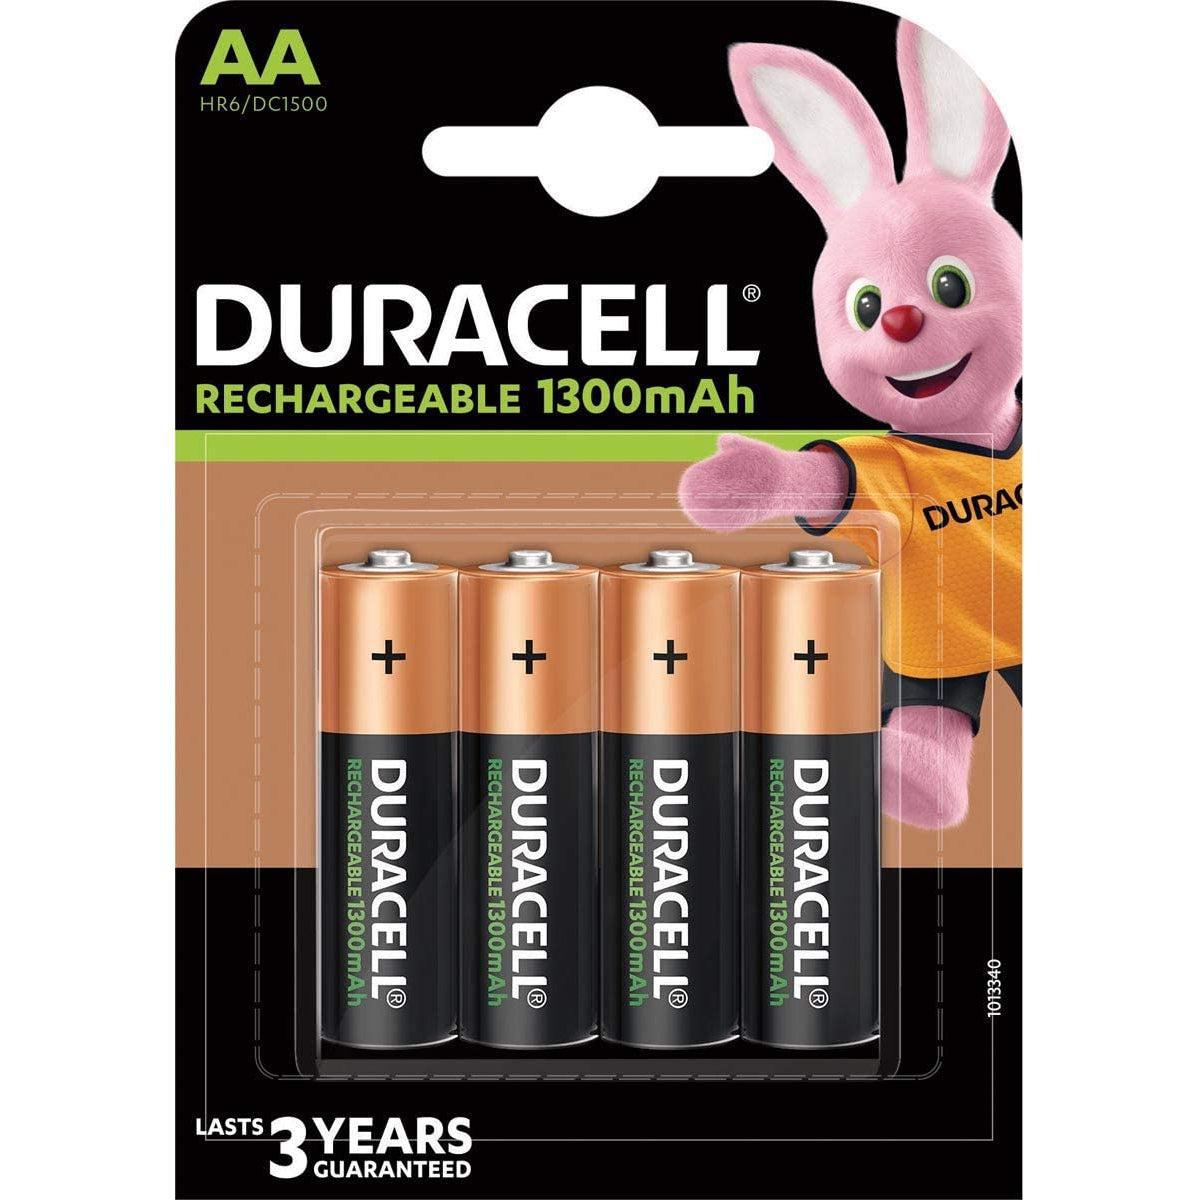 Duracell AA 1300mAh 1.2V NiMH Pre-Charged Rechargeable Batteries HR6 - Healthxpress.ie